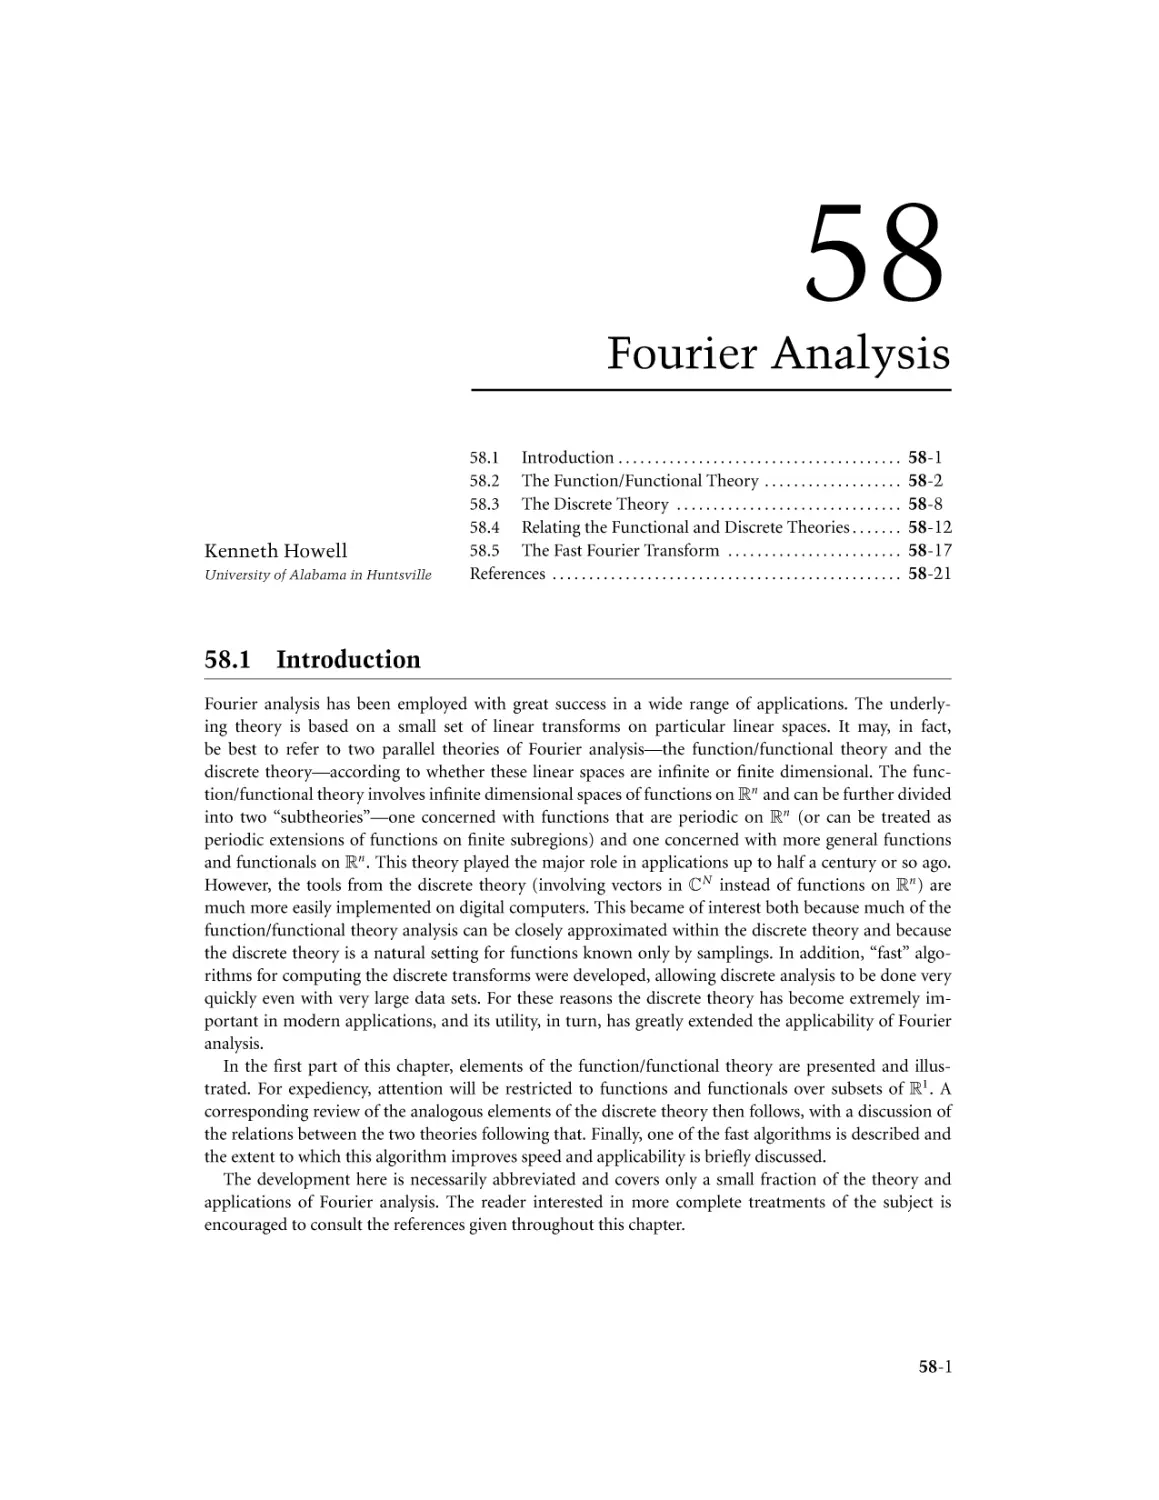 Chapter 58. Fourier Analysis